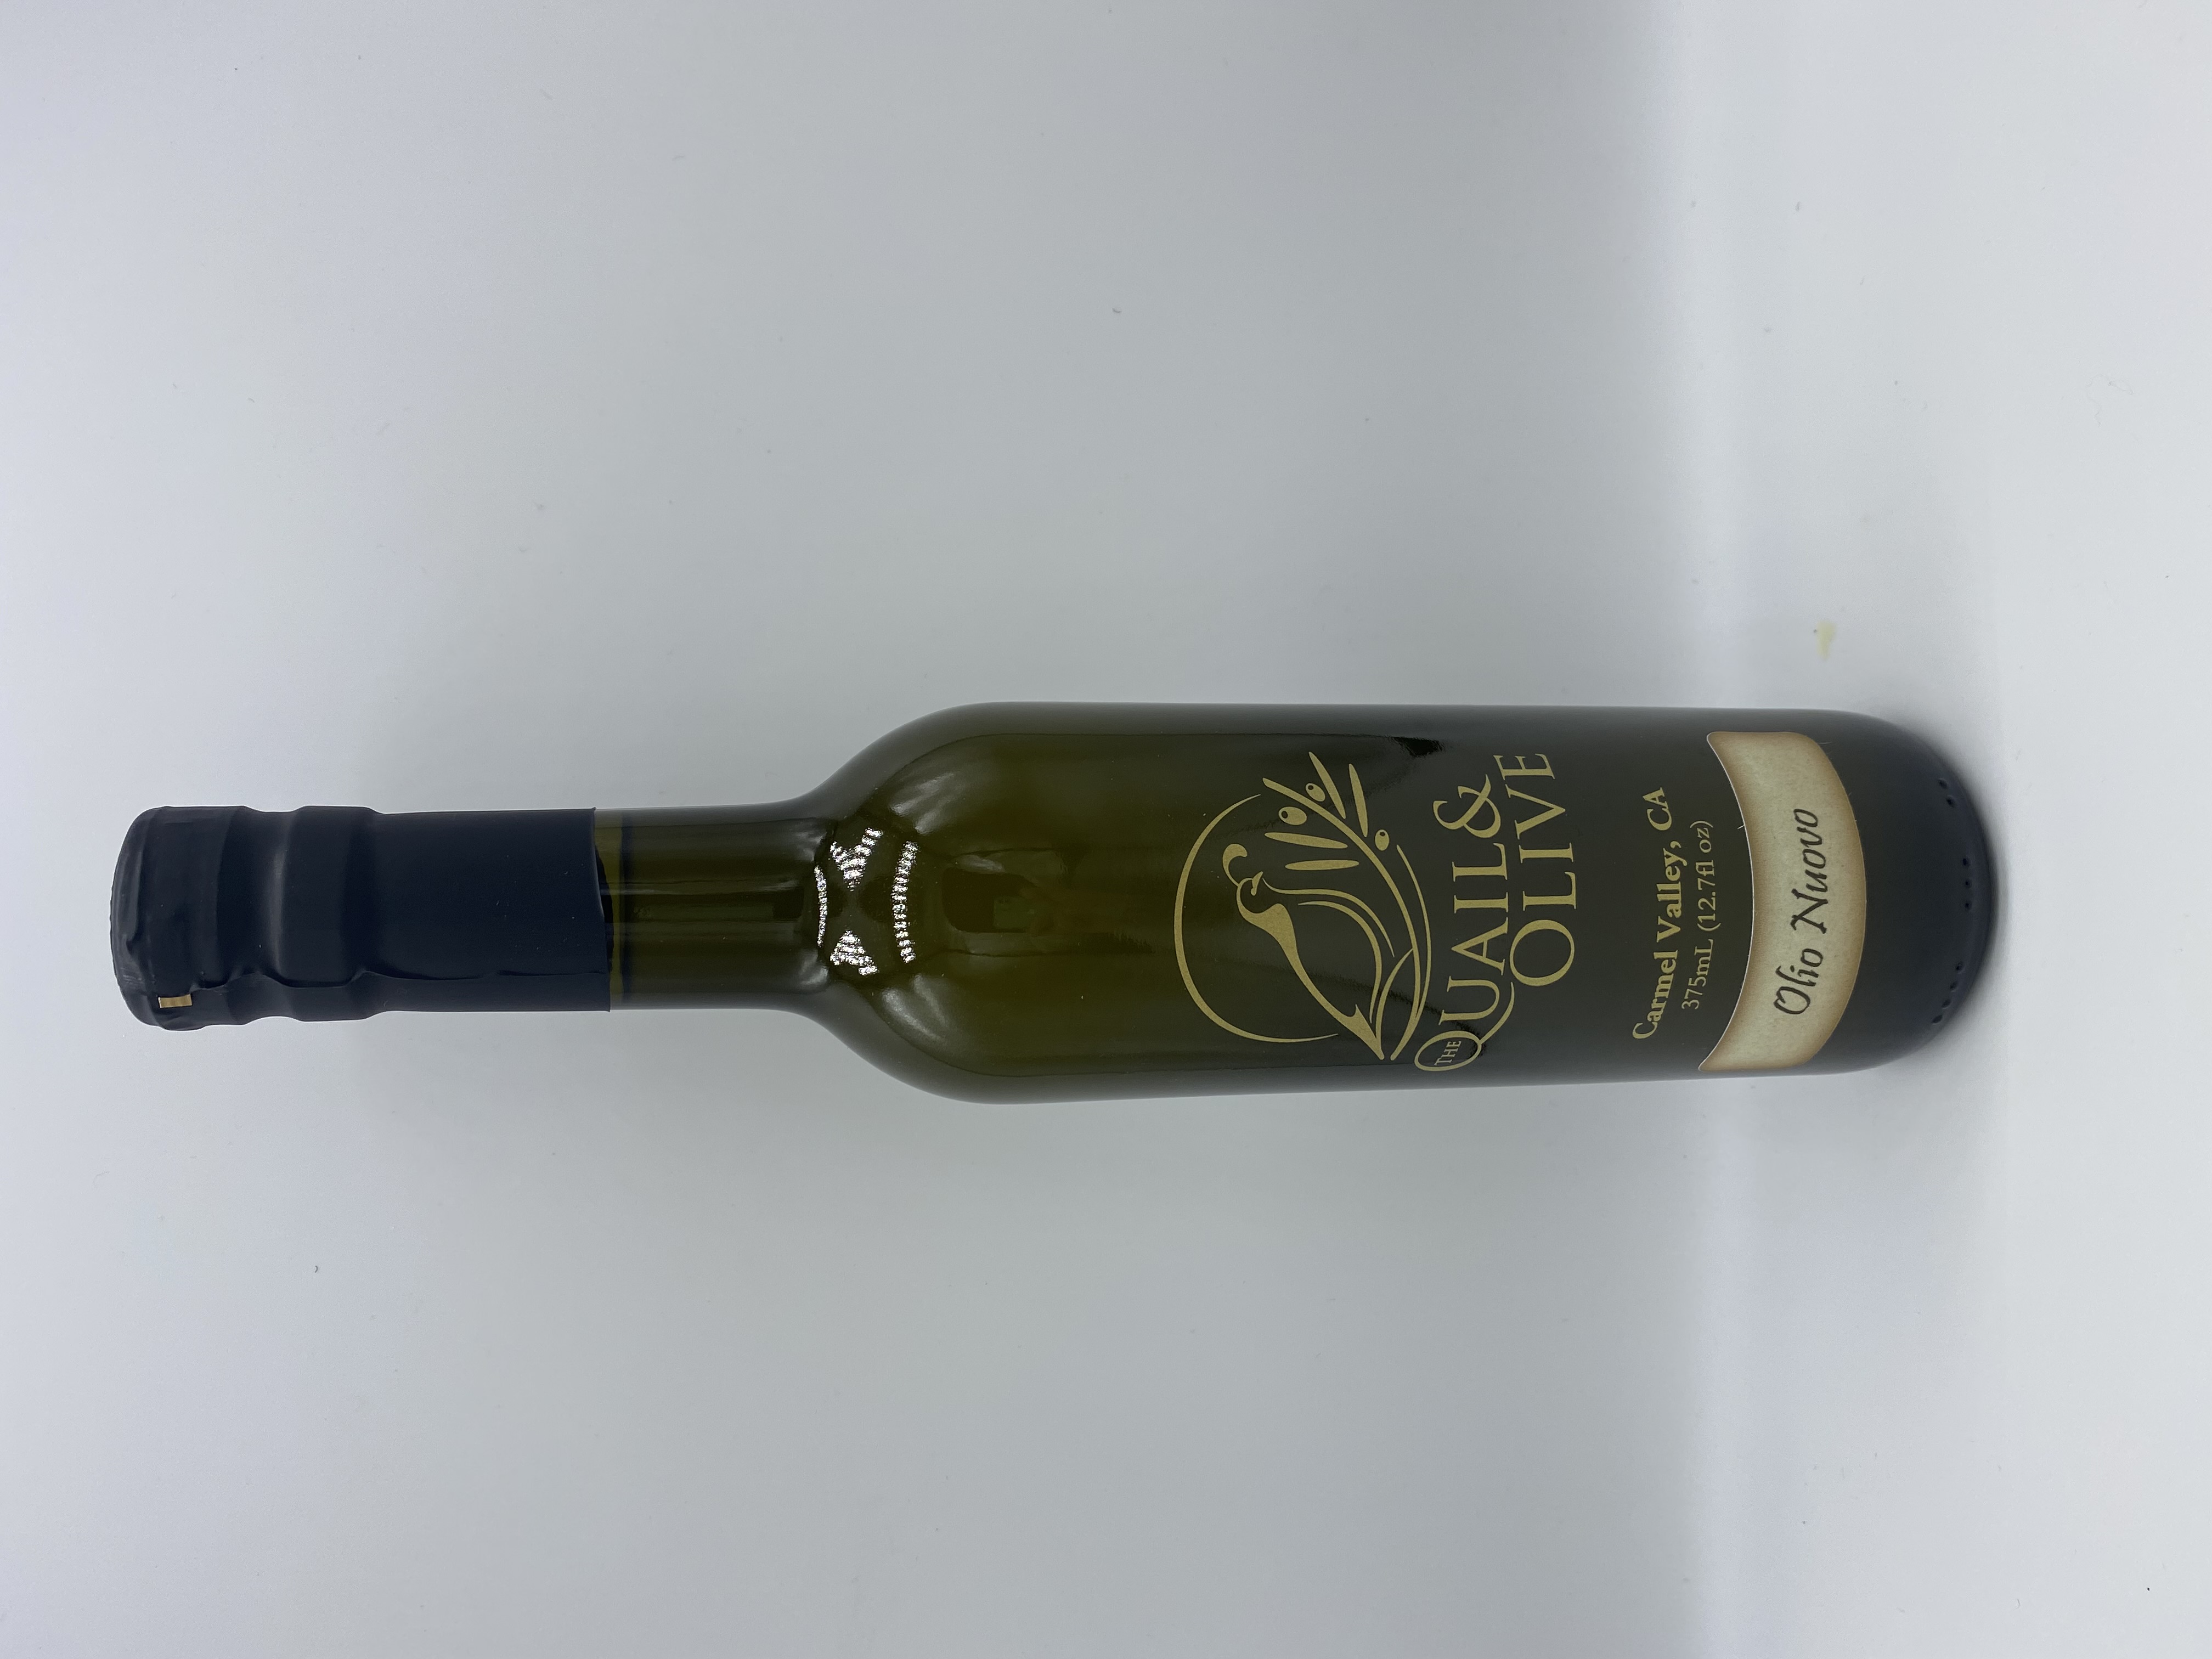 Product Image for Olio Nuovo 375ml